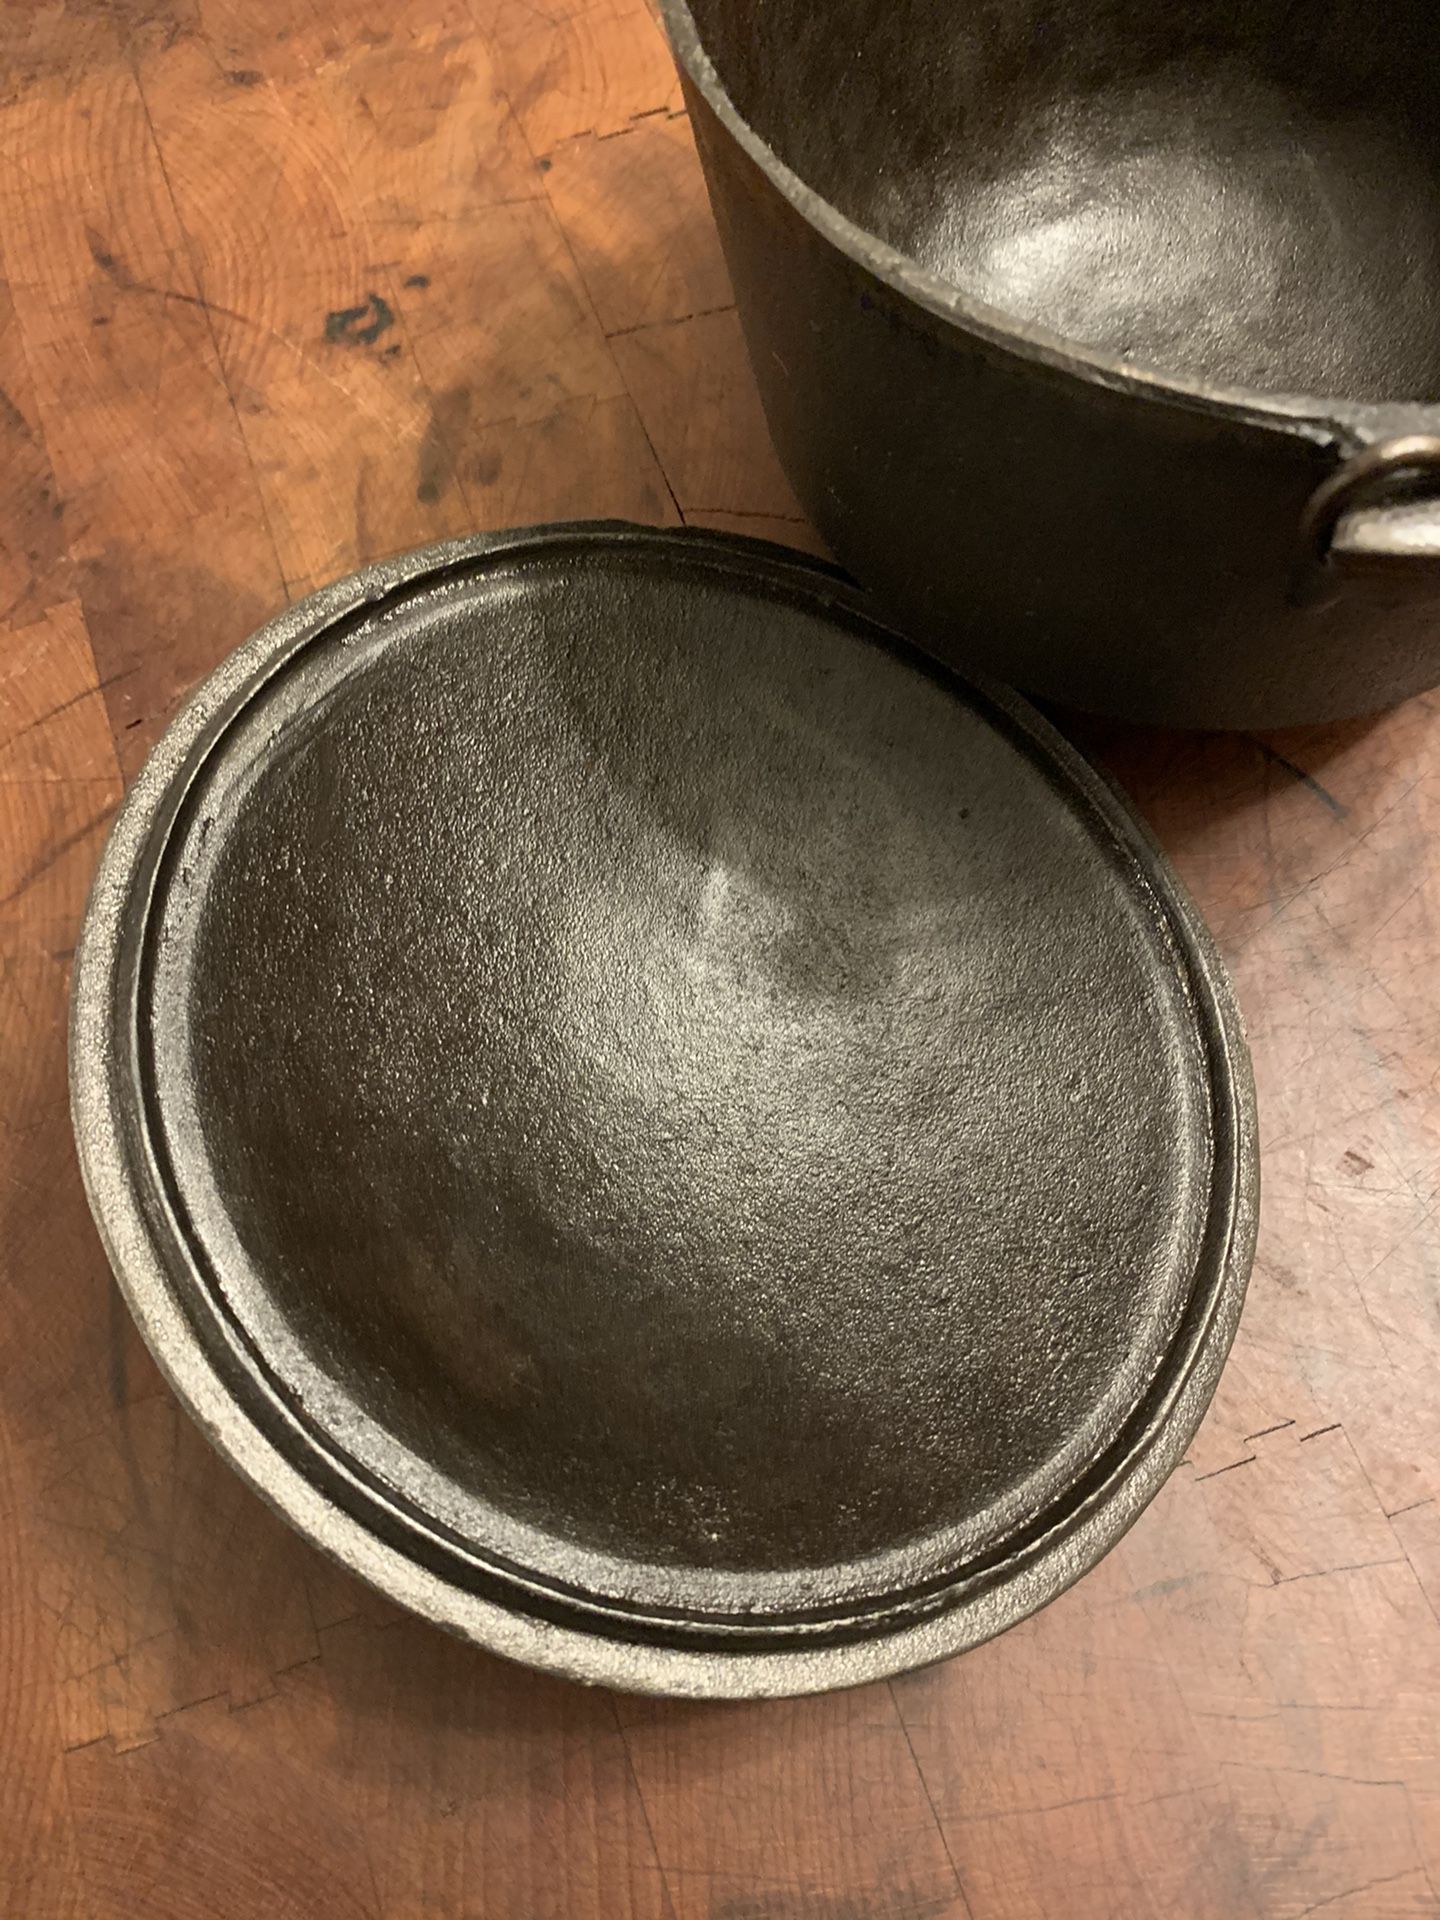 Small Cast Iron Cauldron/Gypsy Pot/Camp Oven - Hammered Lid for